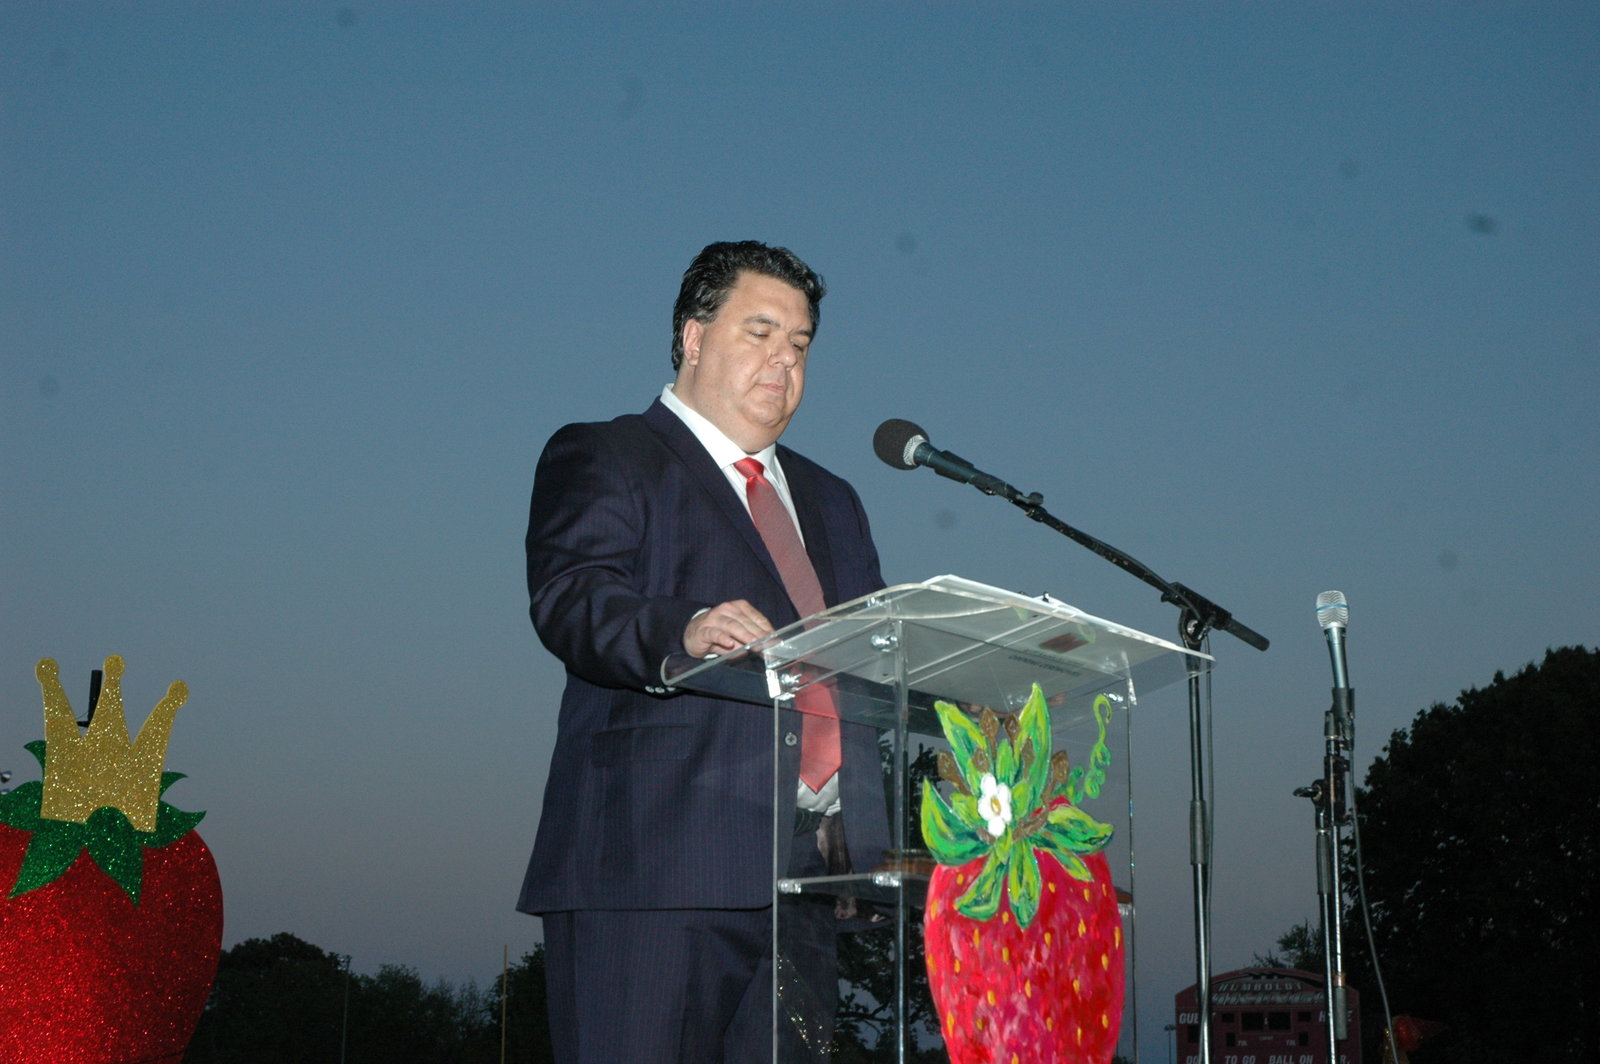 West Tennessee Strawberry Festival - Opening Ceremonies - 38